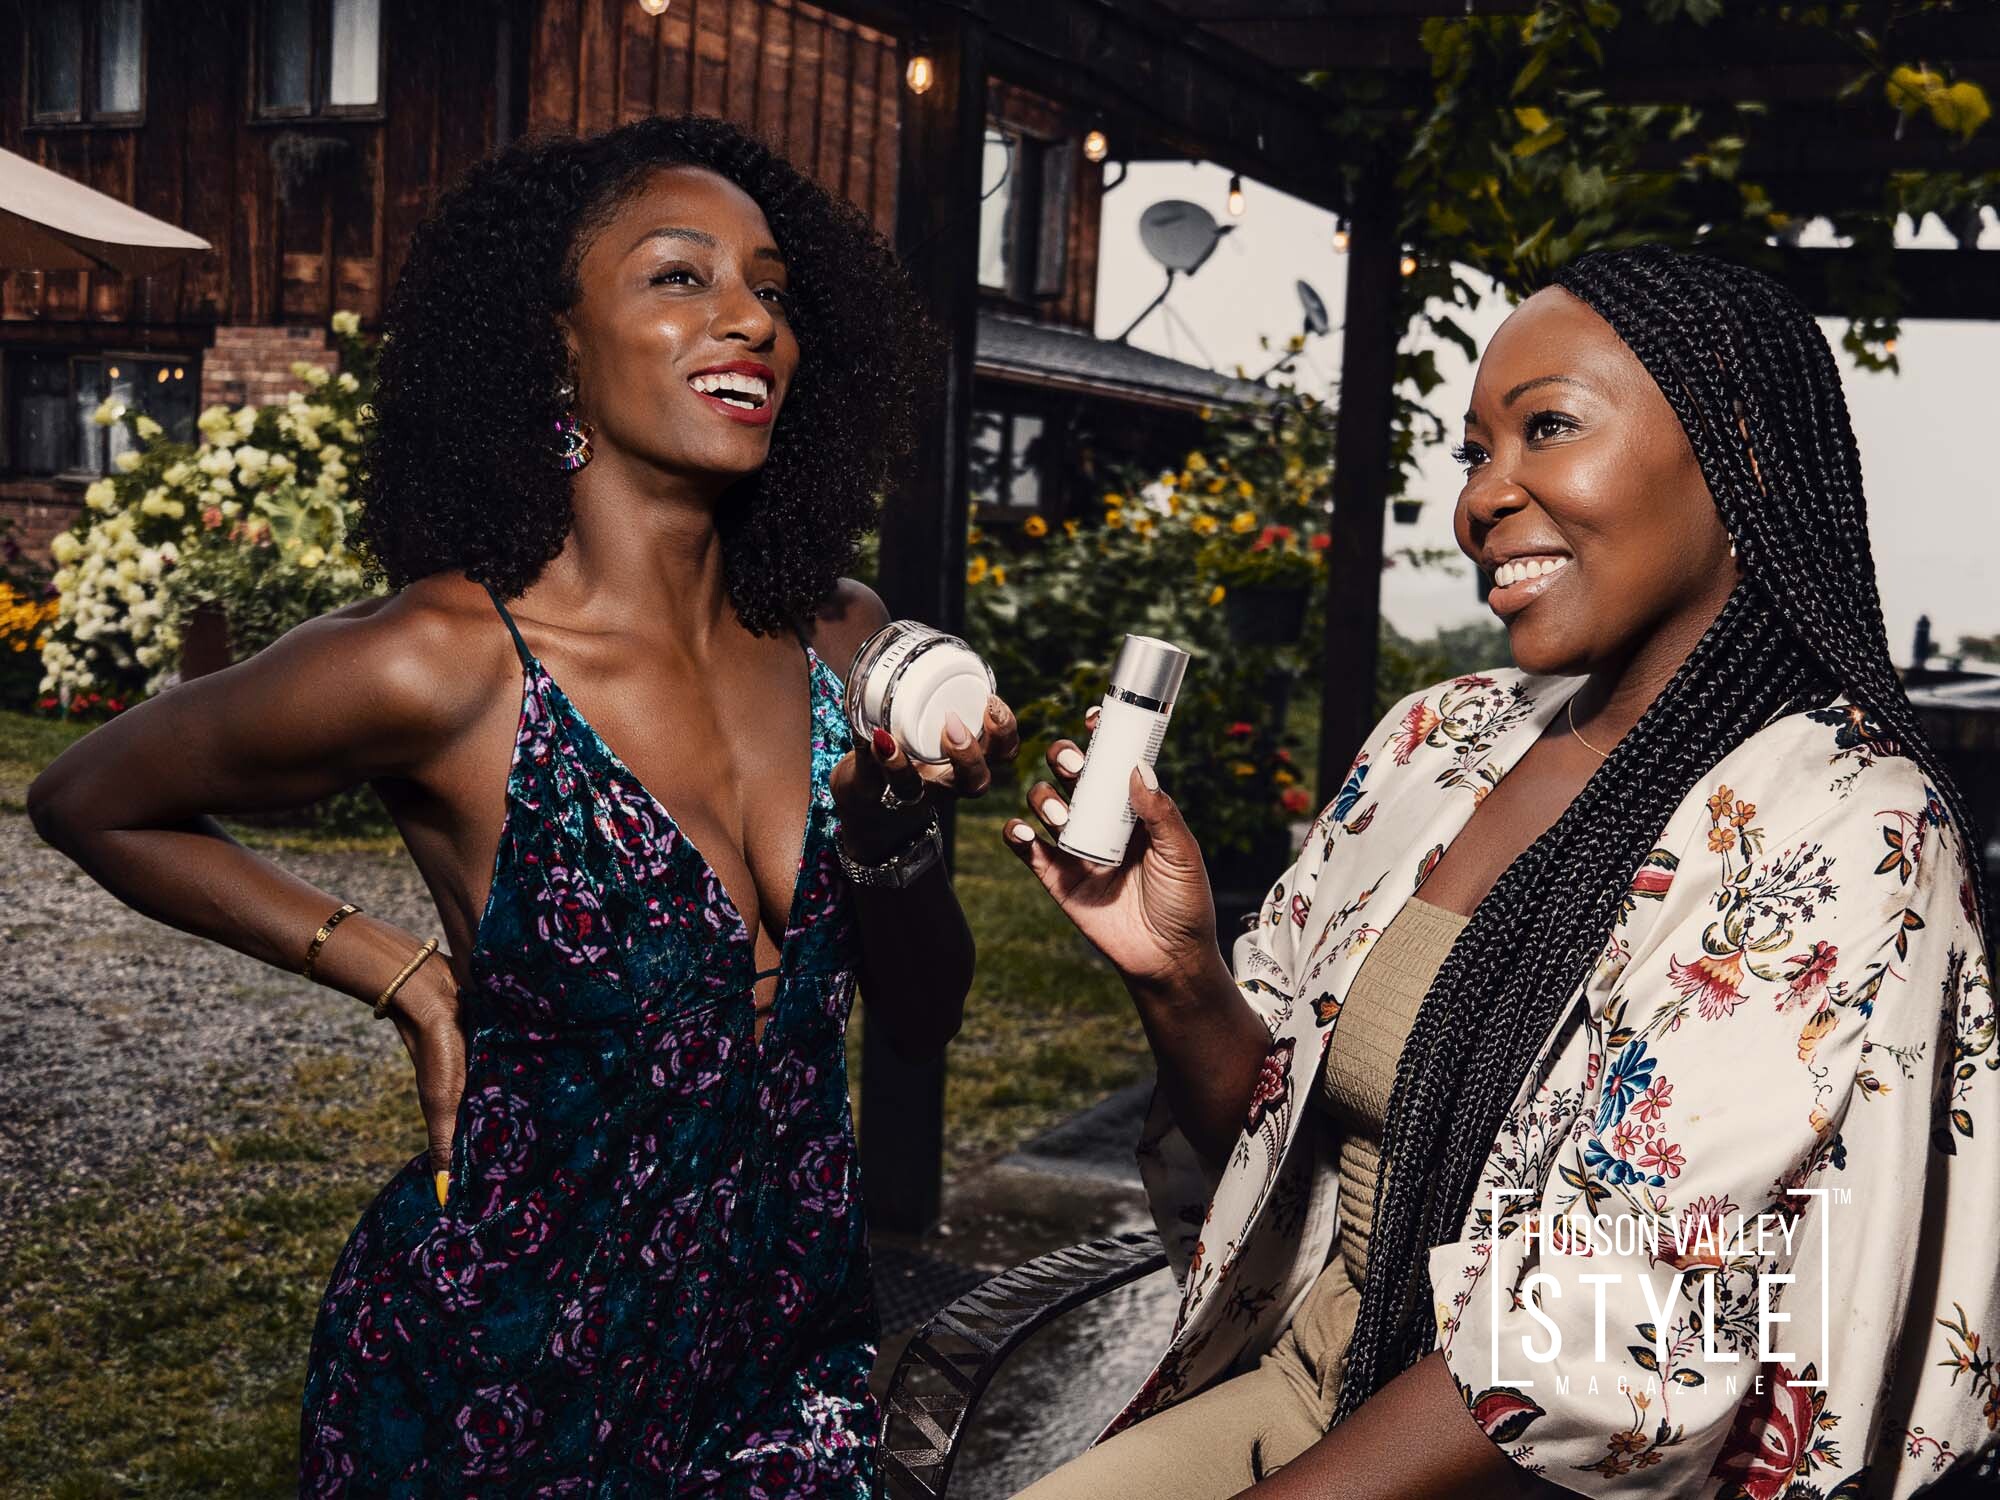 The best natural skincare products designed and crafted by Vanessa Grissom and Felicia Strong from NessFeli right here in the Hudson Valley, New York – Interview by Dino Alexander – Photography by Maxwell Alexander, Duncan Avenue Studios